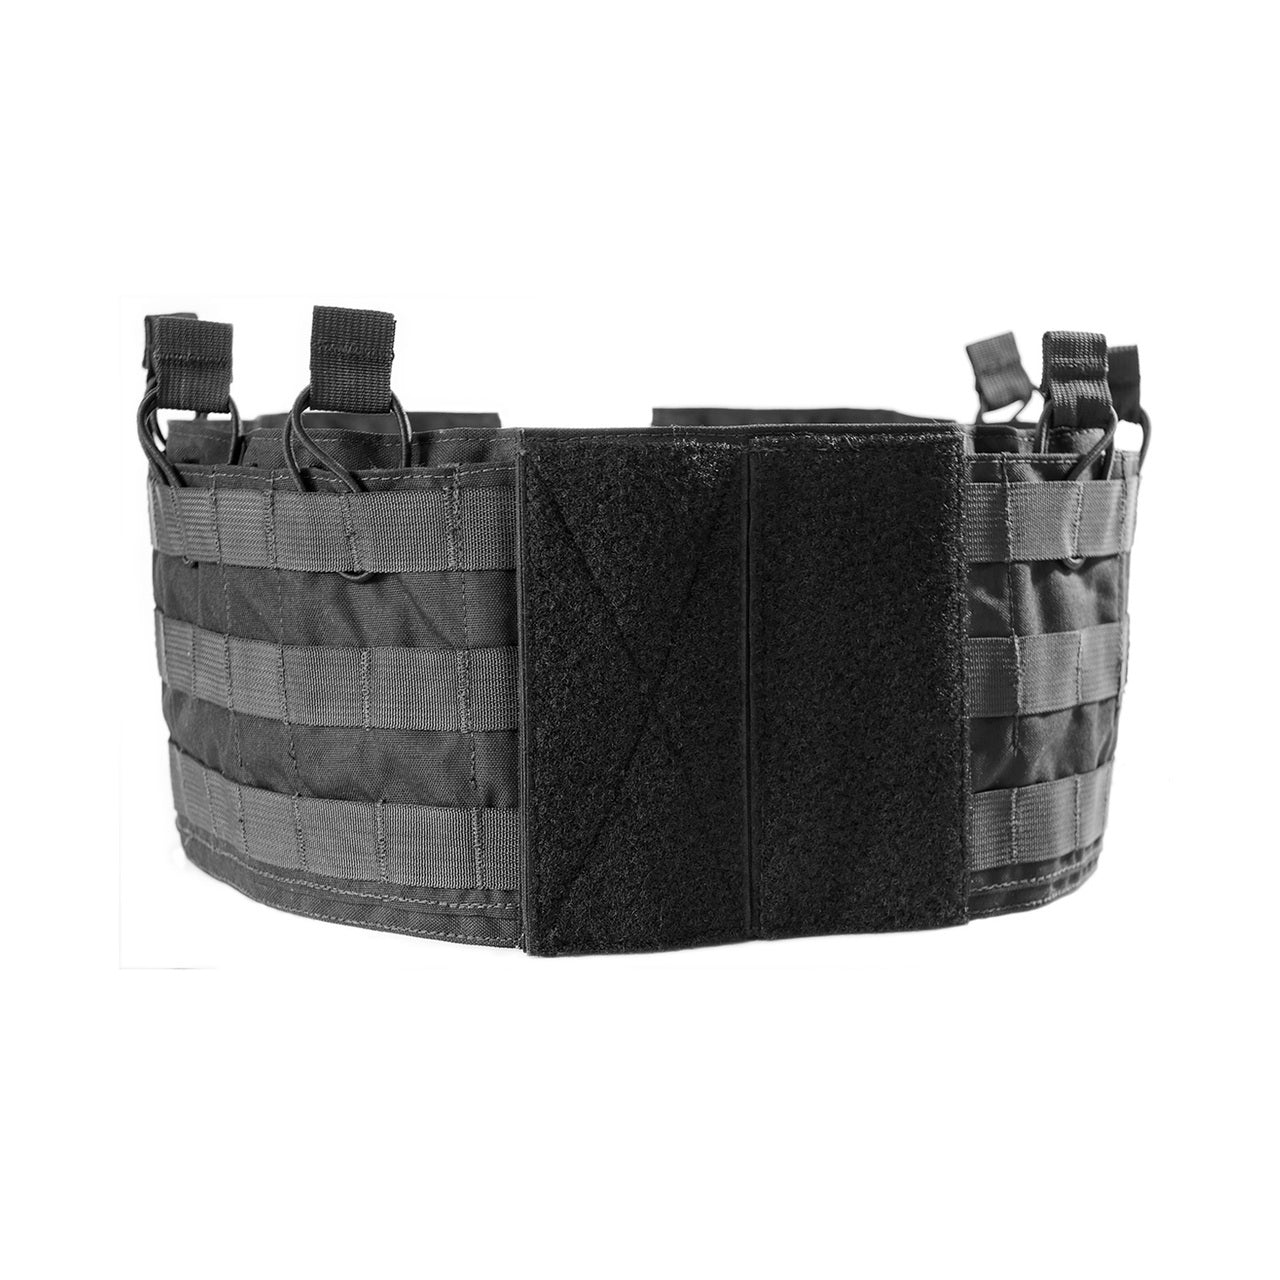 A Shellback Tactical black belt with two straps on it.